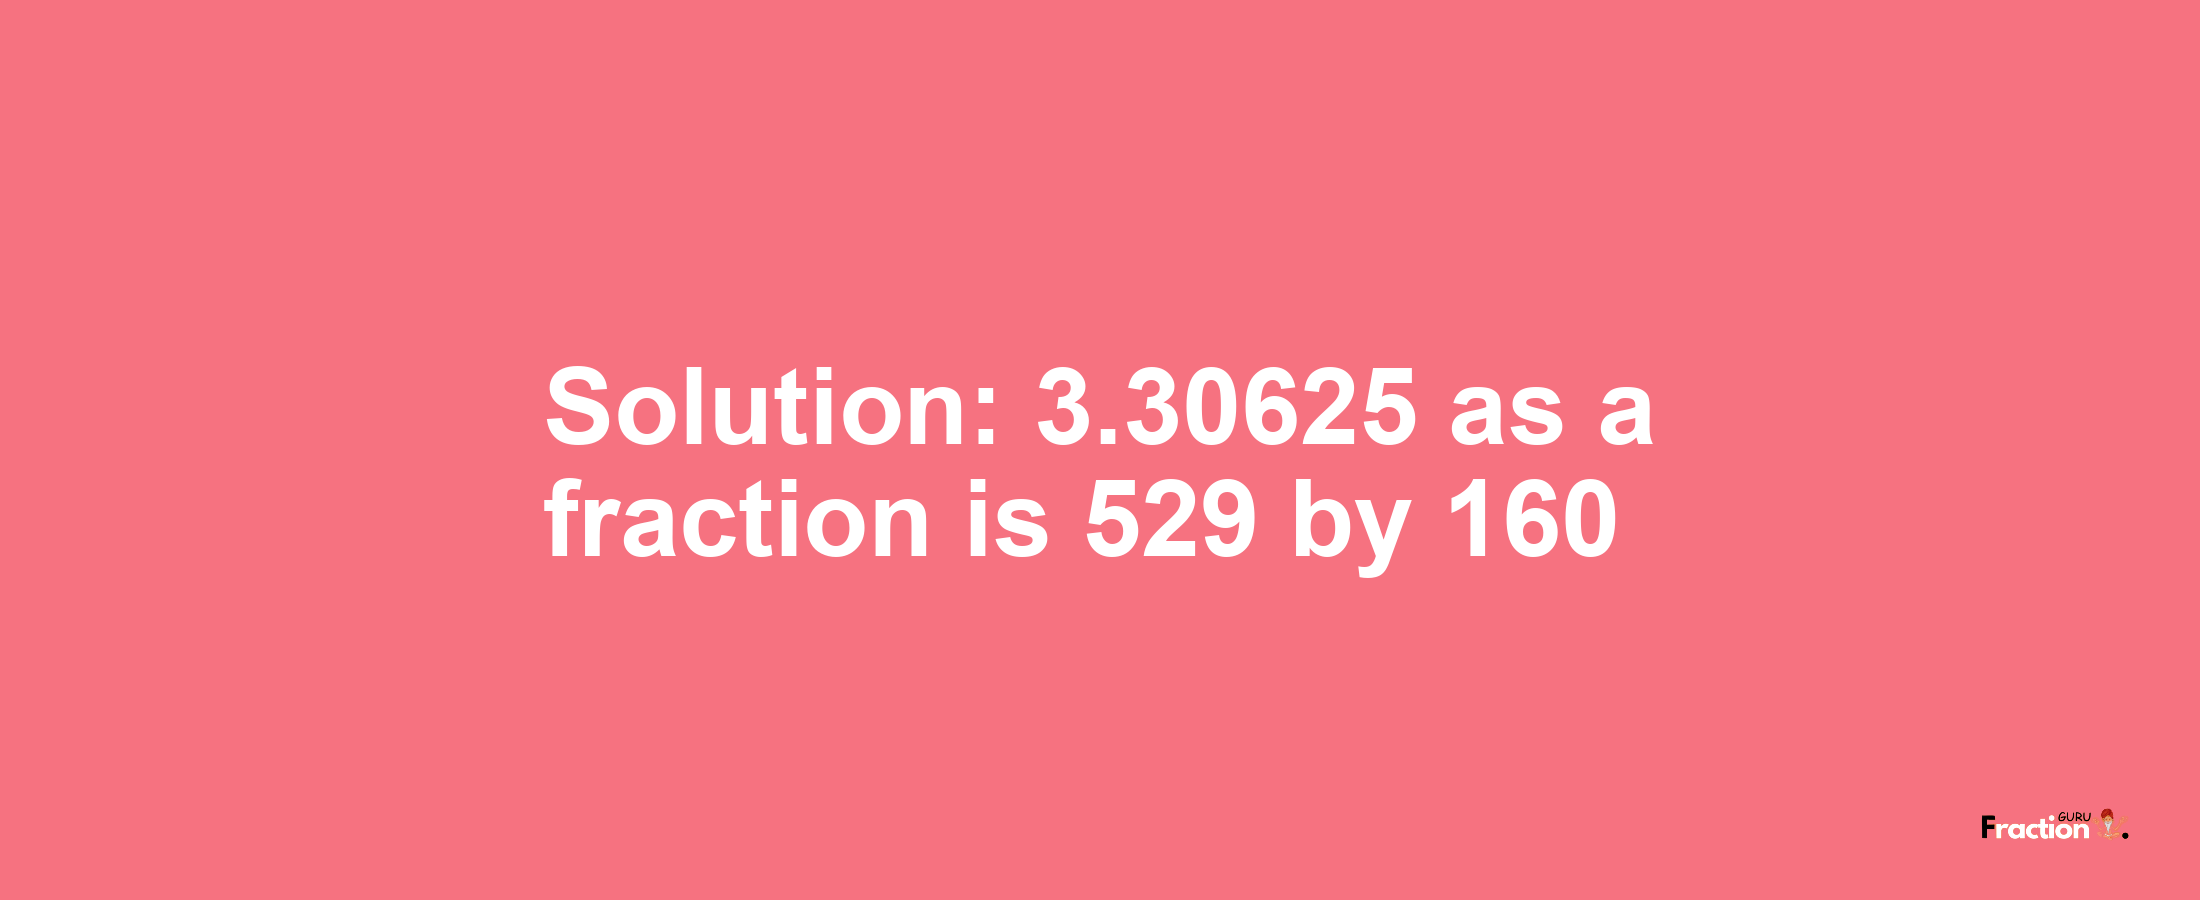 Solution:3.30625 as a fraction is 529/160